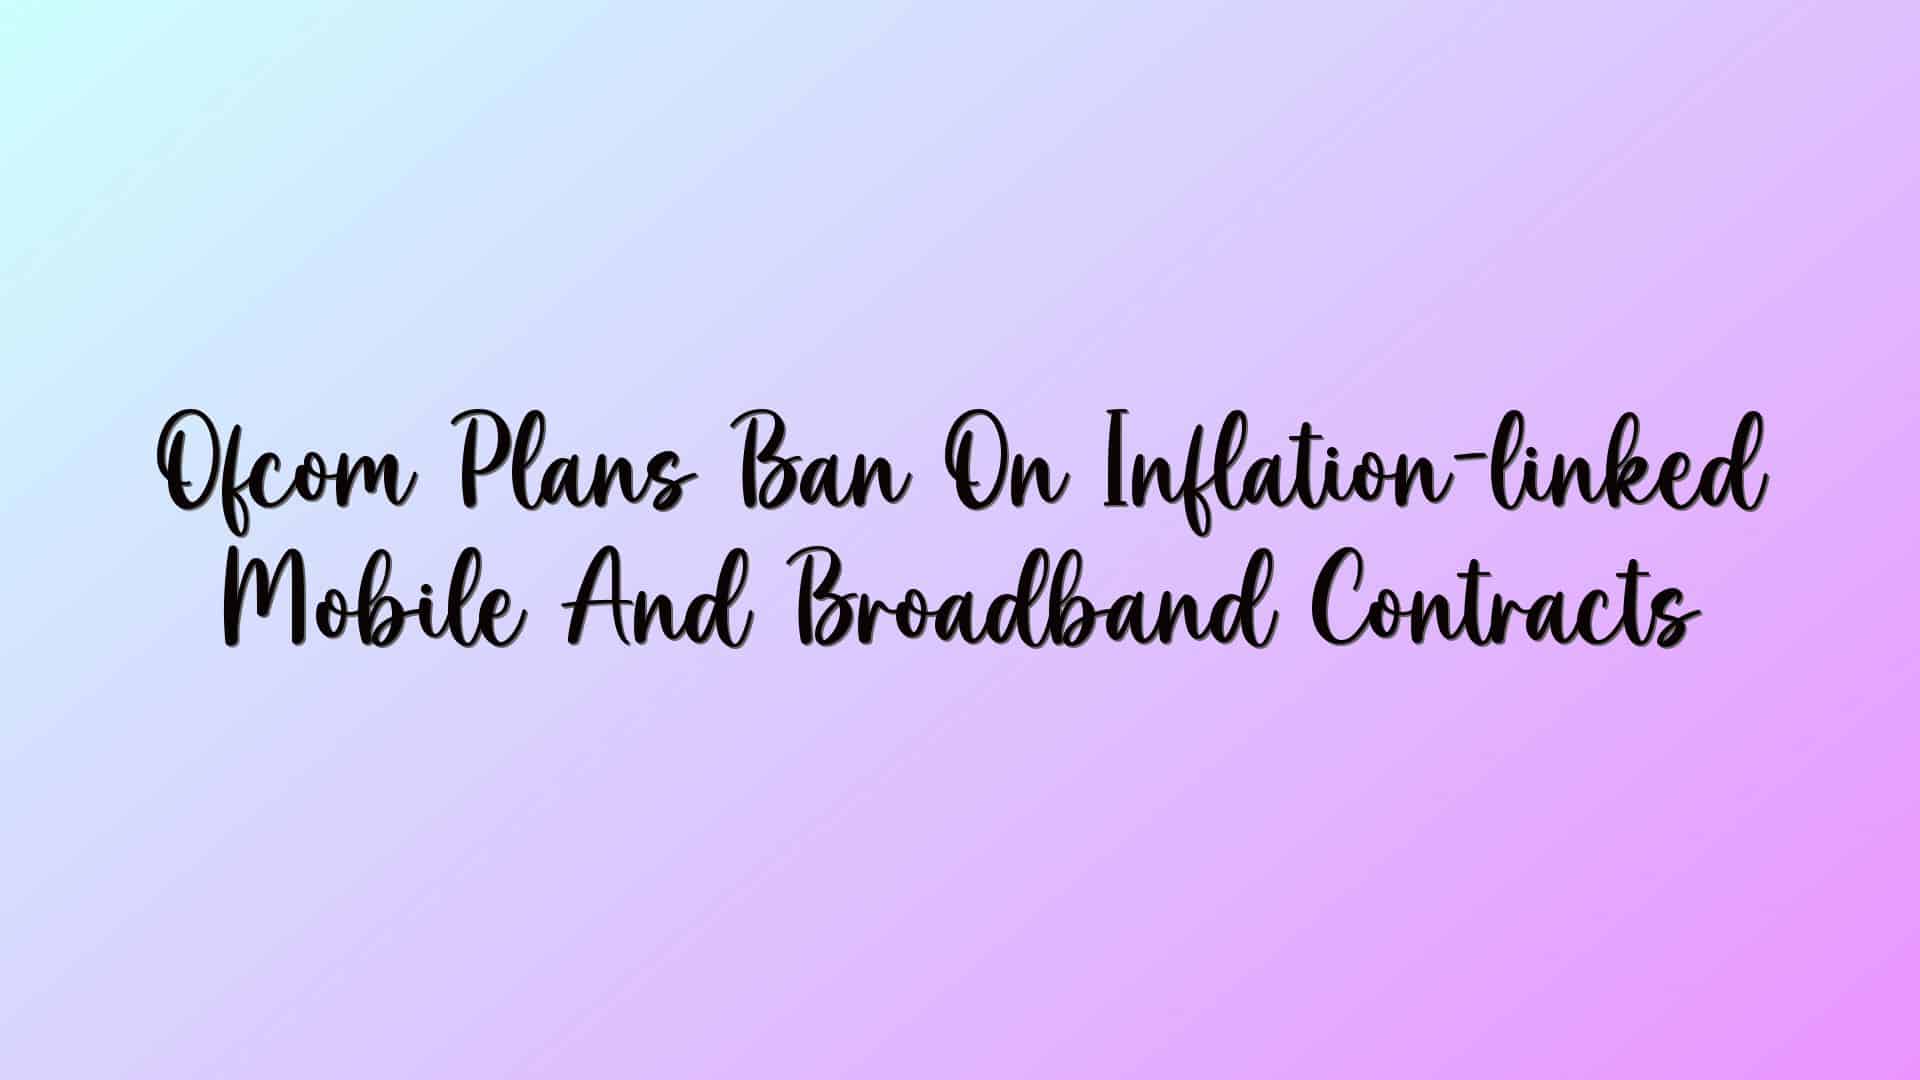 Ofcom Plans Ban On Inflation-linked Mobile And Broadband Contracts